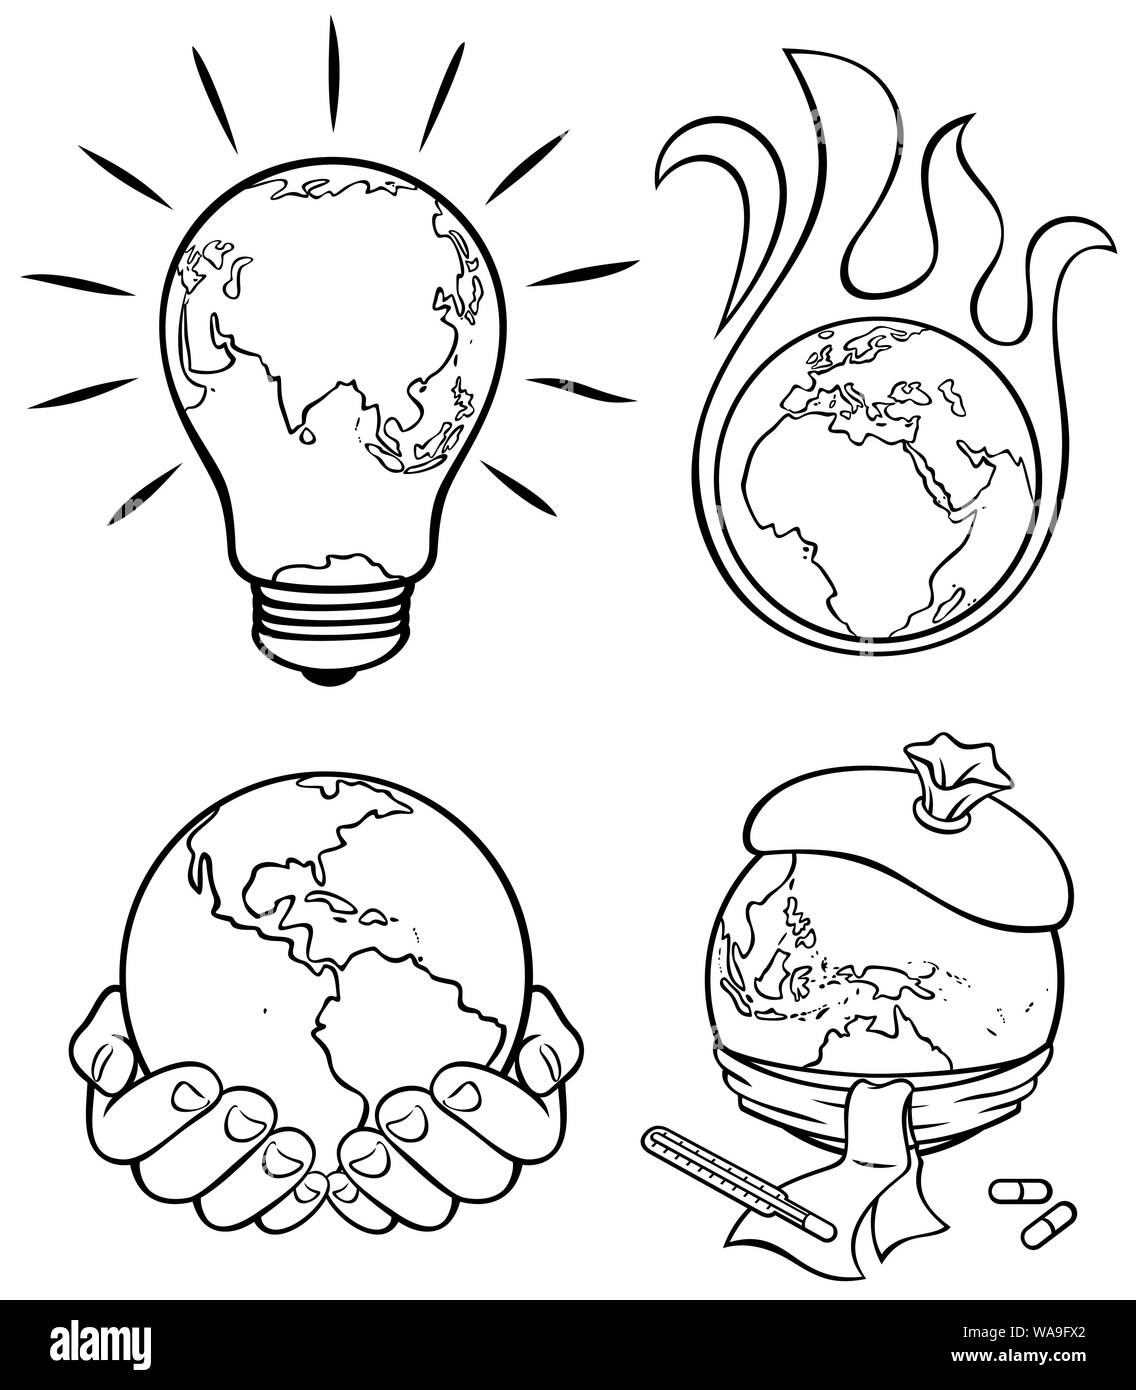 Ecology Concepts 3 Line Art Stock Vector